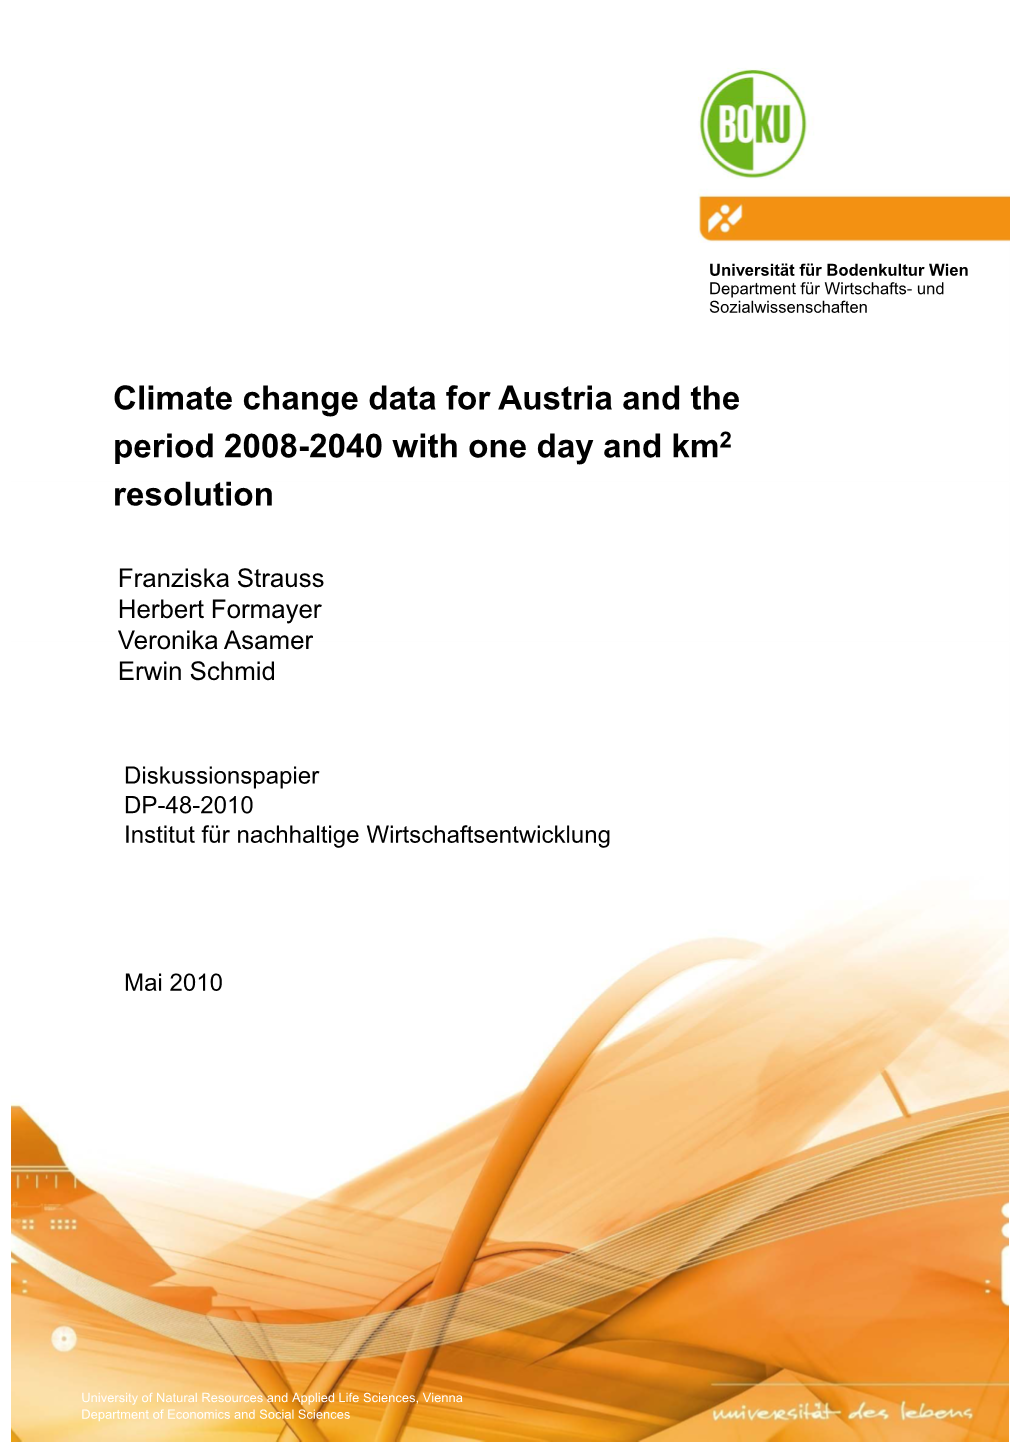 Climate Change Data for Austria and the Period 2008-2040 with One Day and Km2 Resolution